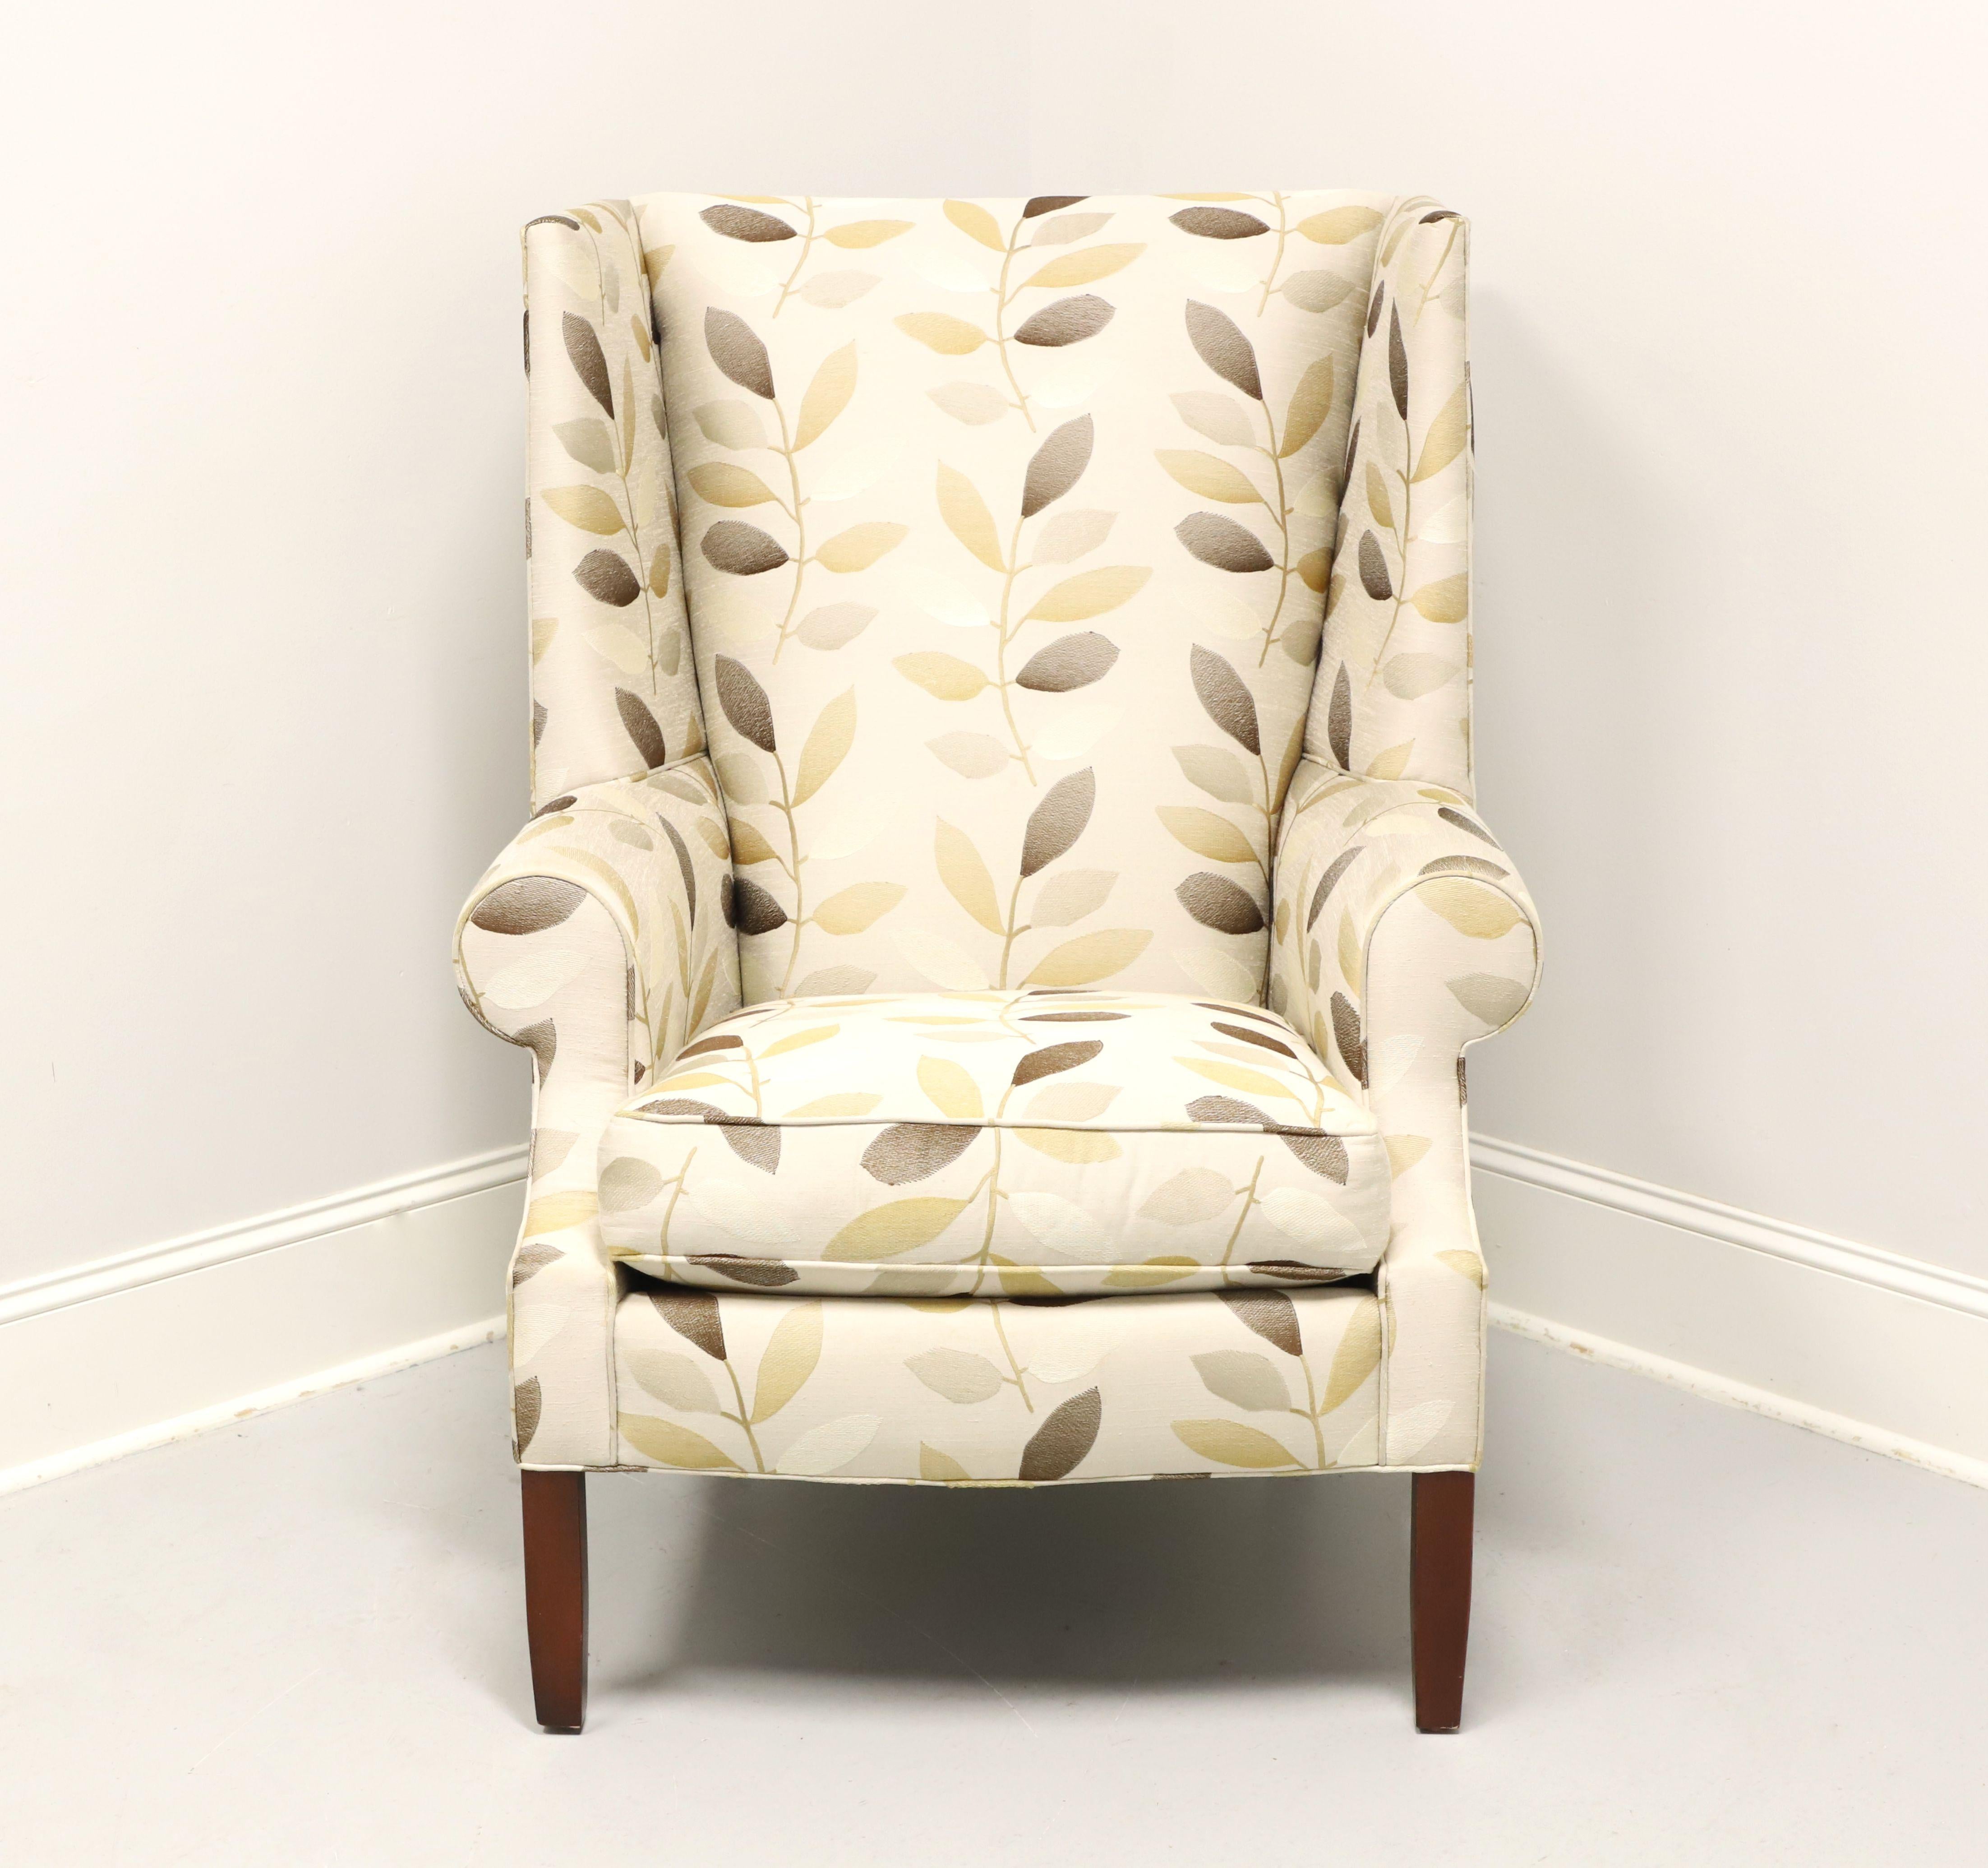 A Transitional style wing back chair by Stickley Furniture, their Park City. Fabric upholstered in a pattern of various neutral tone leaves amidst a beige color base on a cherry wood frame with their Metro finish to the tapered straight front legs